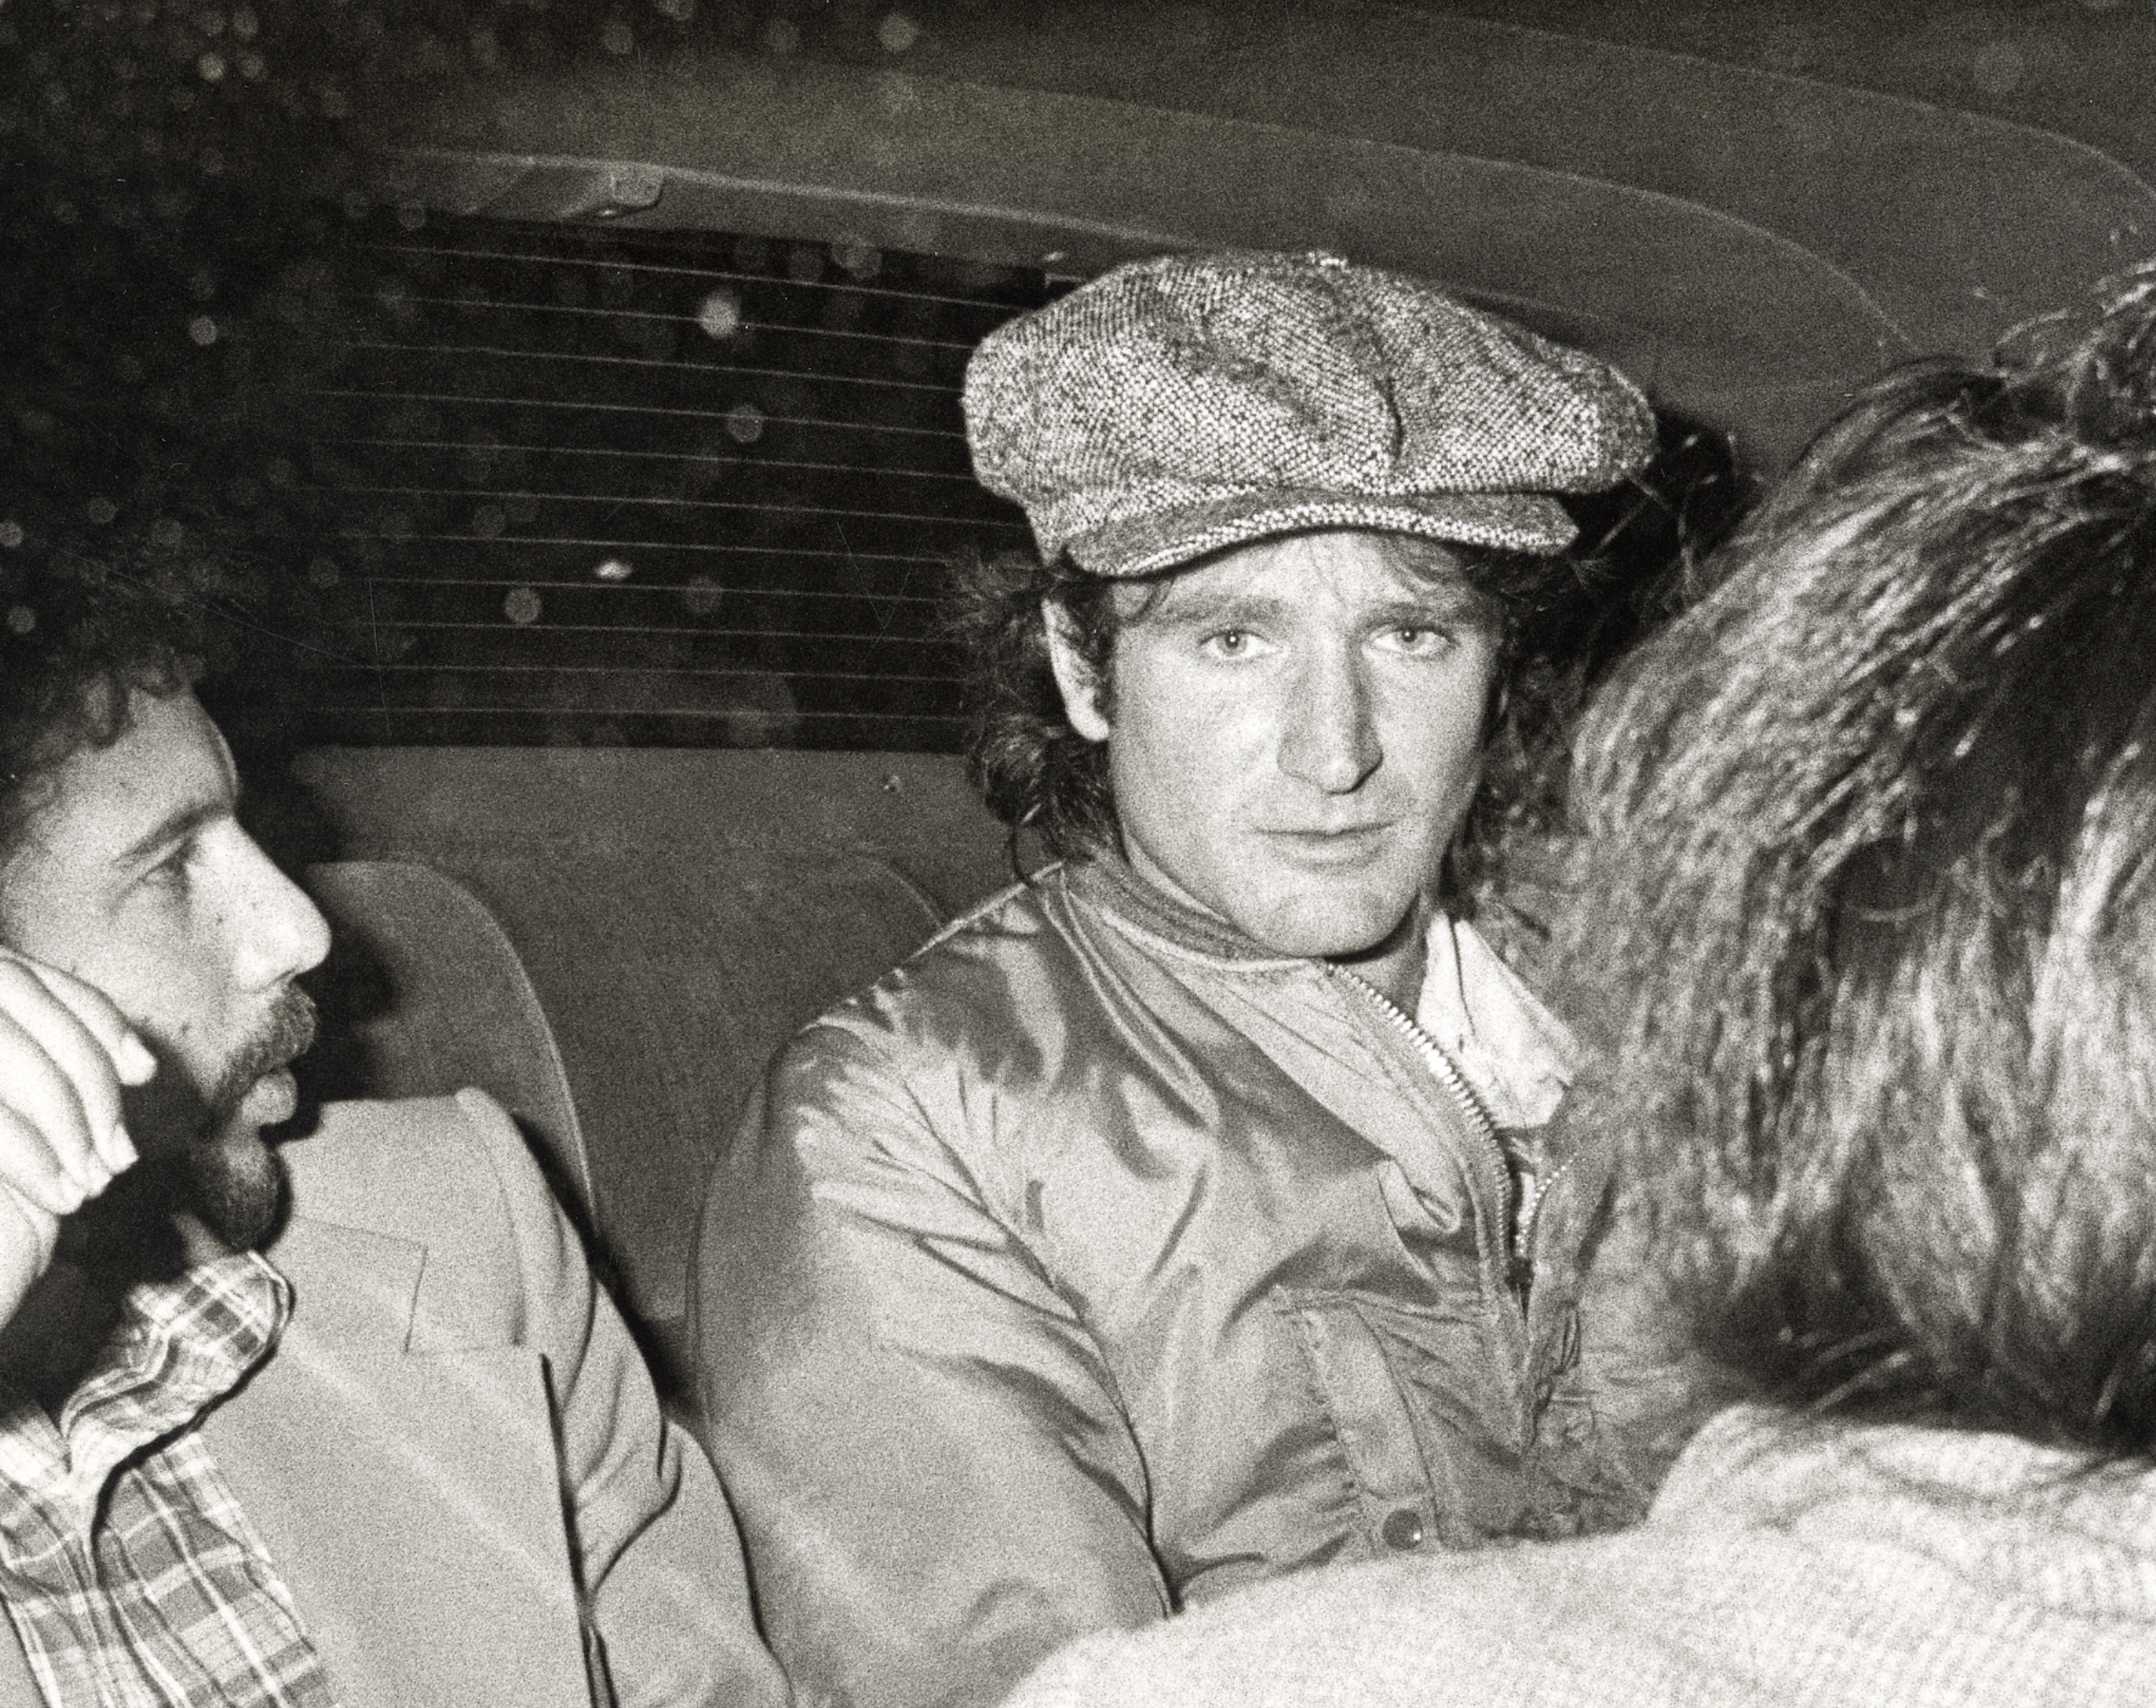 Robin Williams pictured after a "Saturday Night Live" taping at the NBC Studios in New York City, on November 11, 1978 | Source: Getty Images